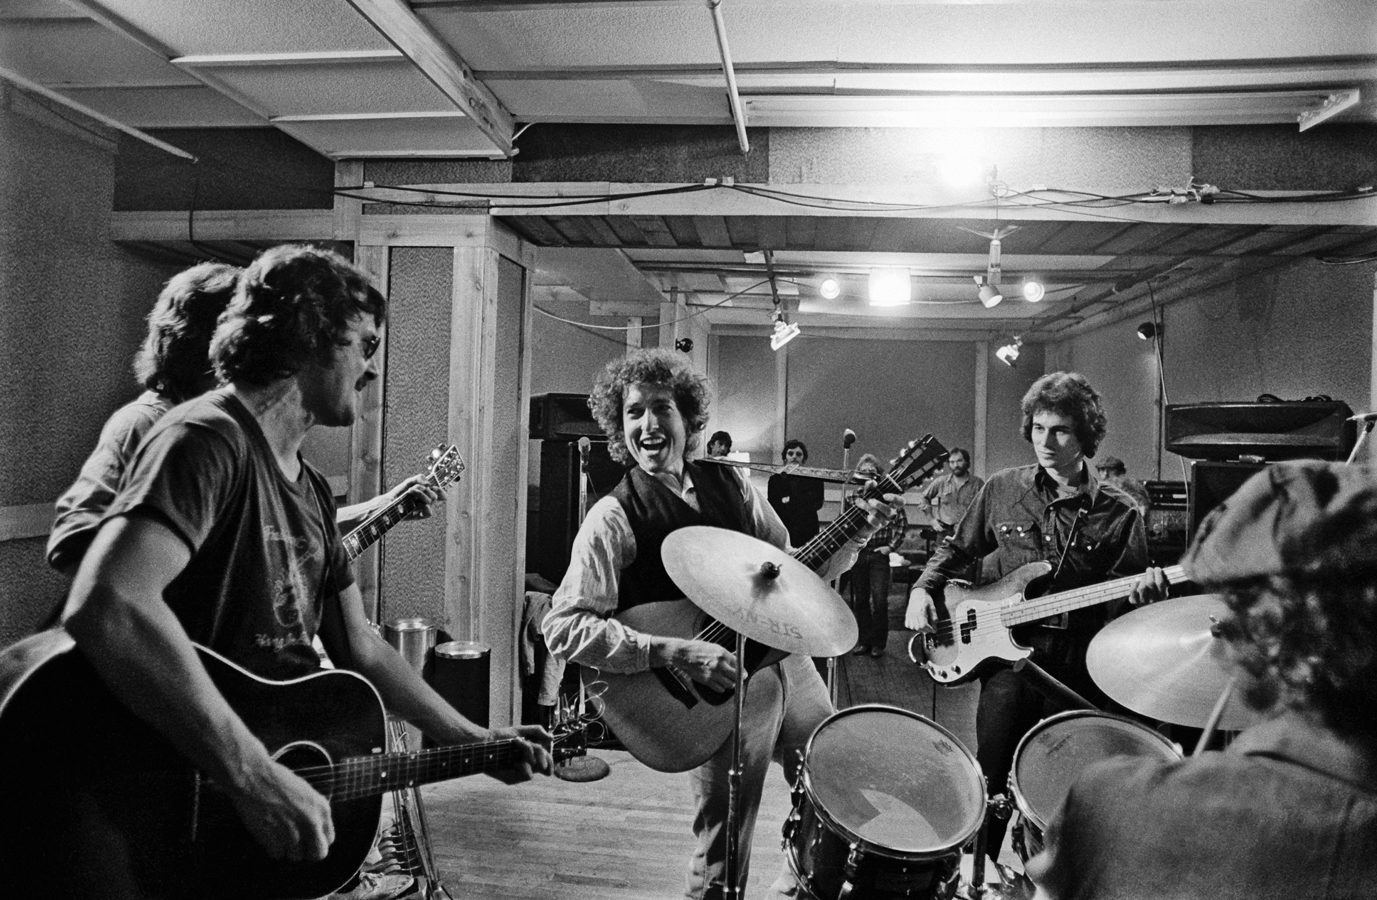 Dylan and the band warm up, during Ken’s first shoot in October 1975, documenting a day of rehearsal sessions in New York.